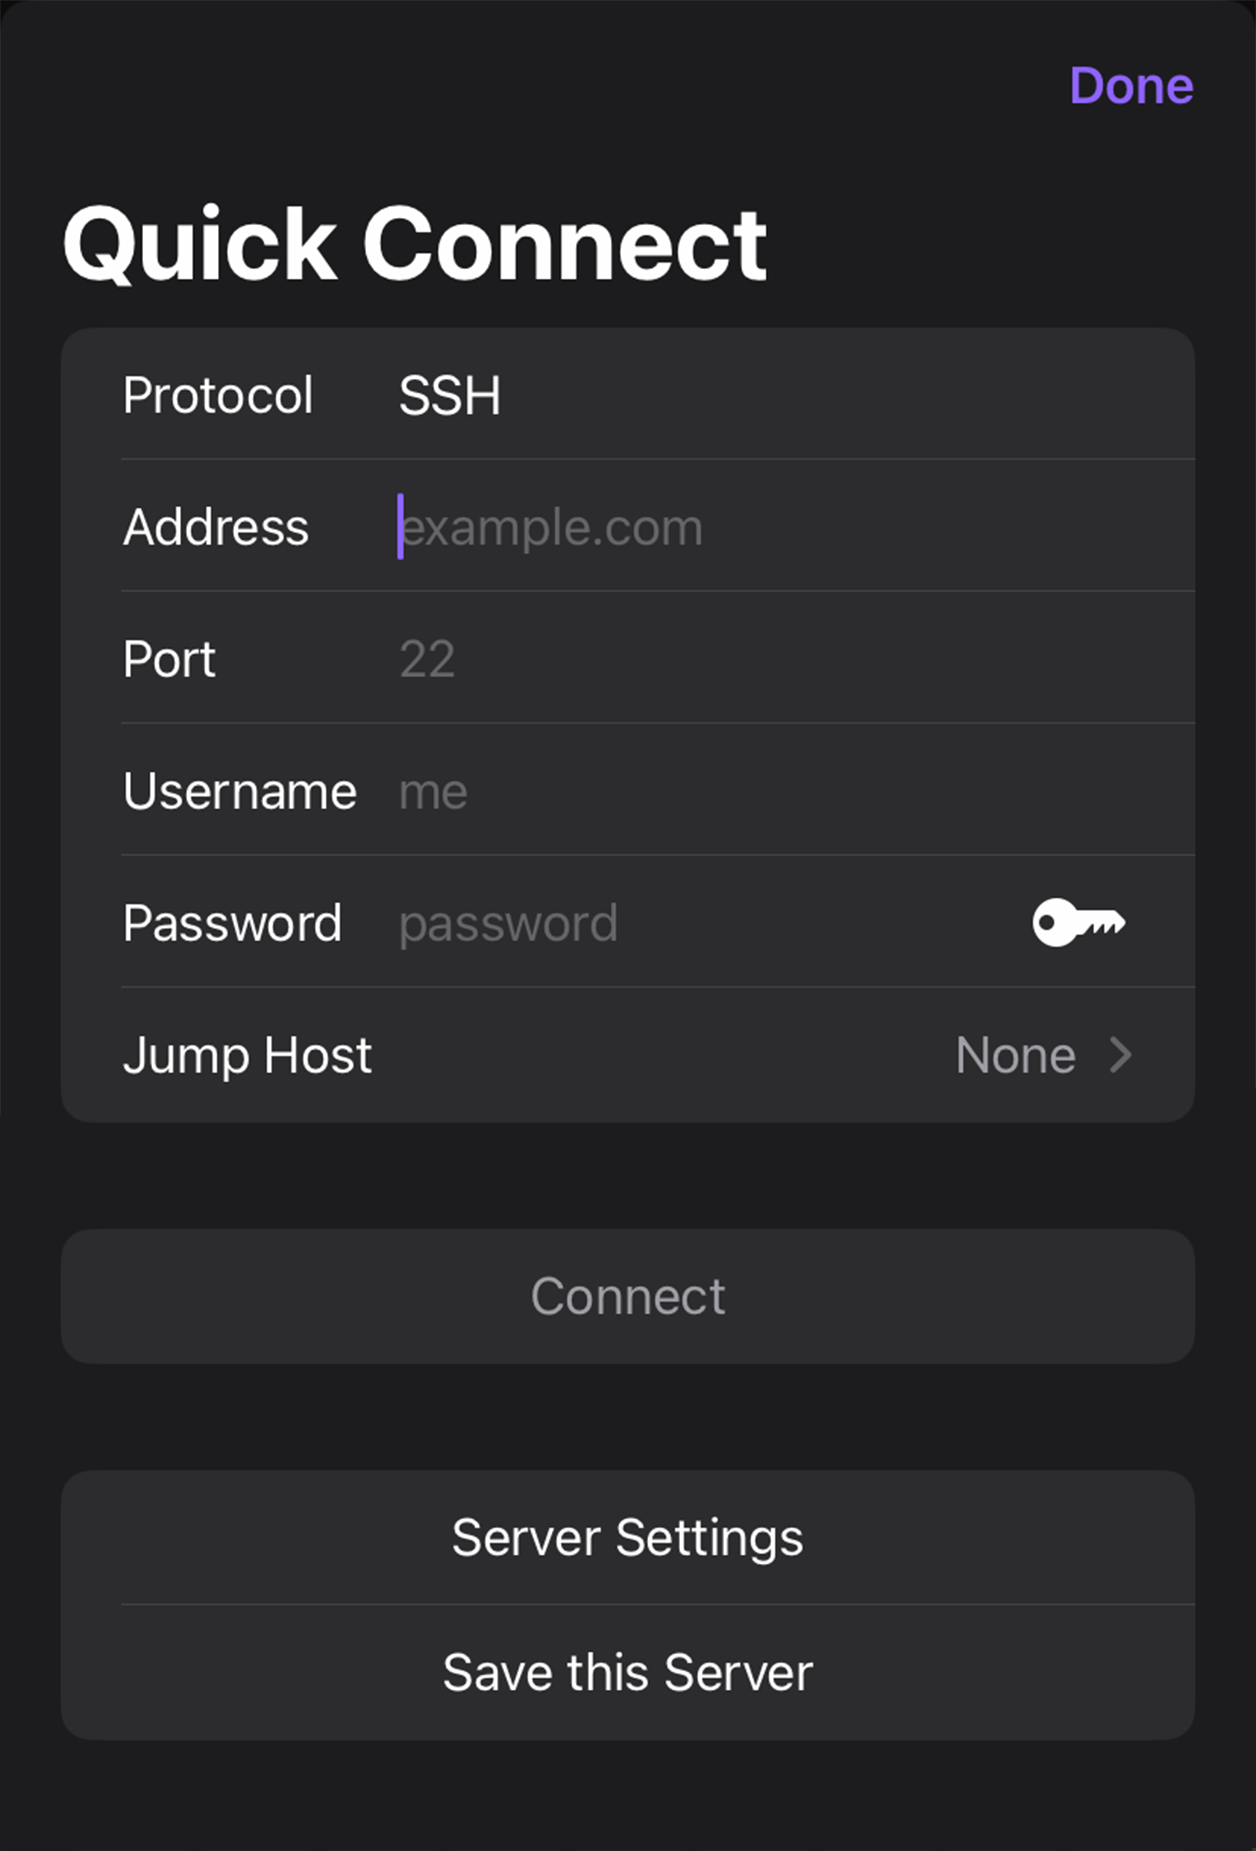 The Quick Connect view in Prompt for iOS.